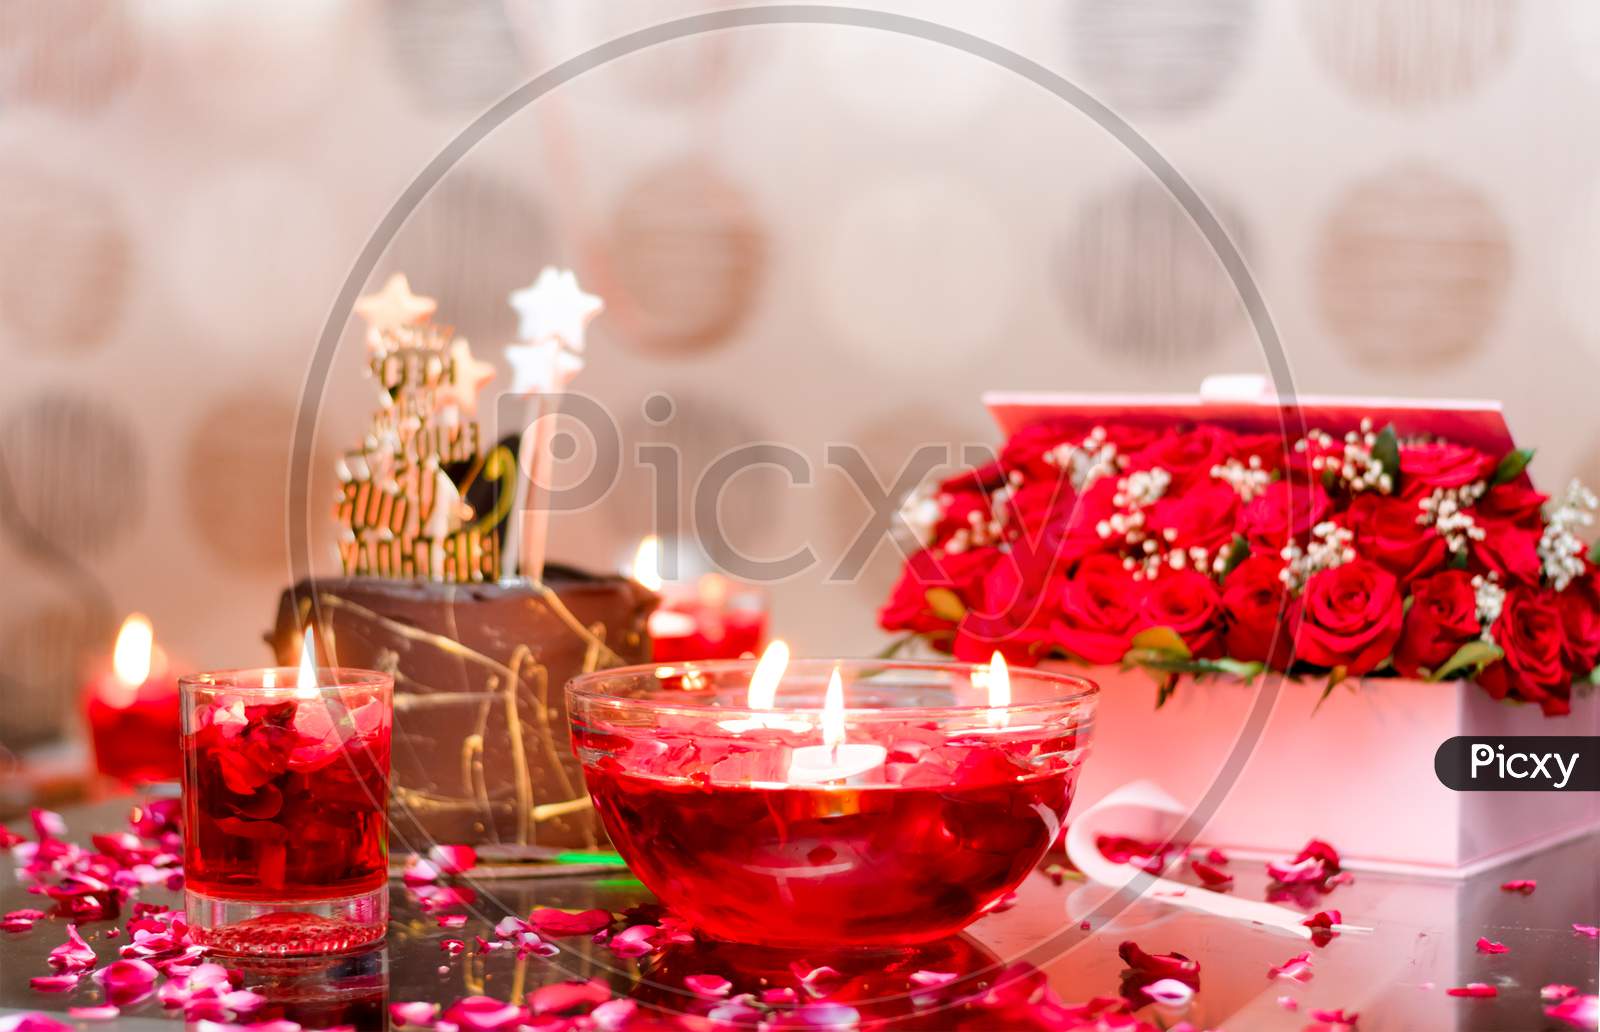 Decoration Of Red Flowers And Candles For Celebration.